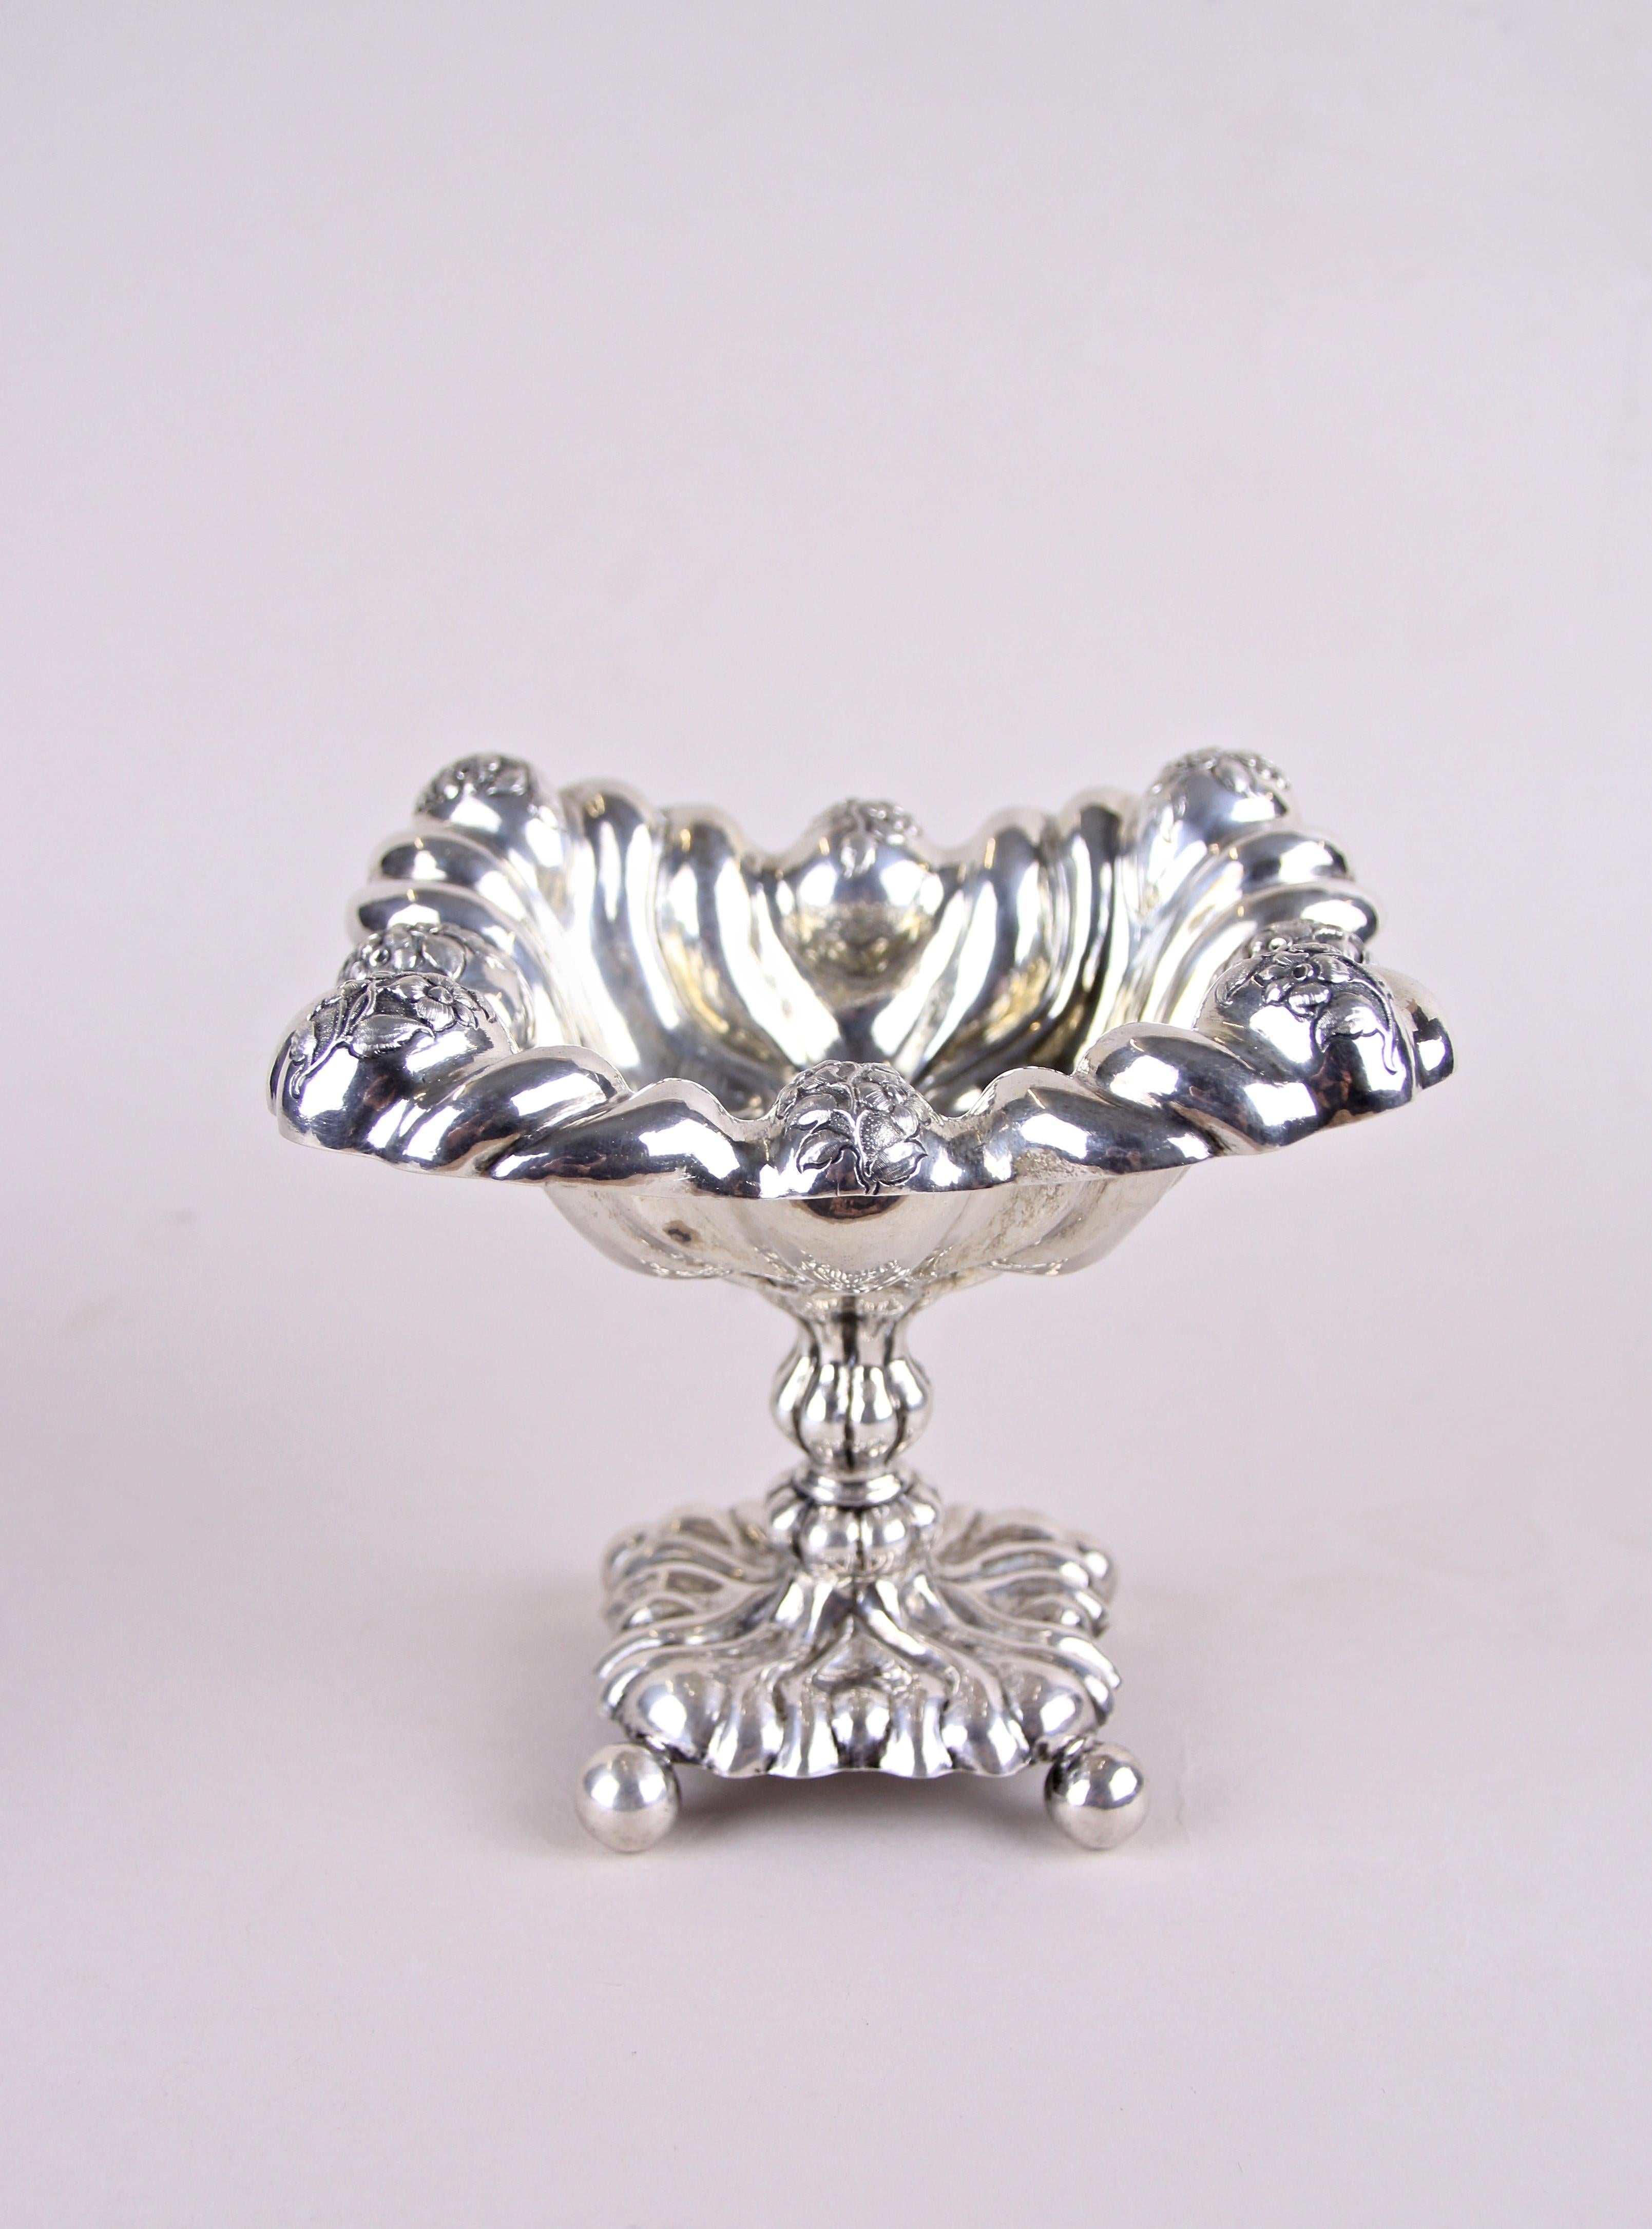 Superb silver Biedermeier sugar bowl with matching sugar tongs from Austria, circa 1840. Made out of 13 lot silver (812 silver) this breathtaking embossed silver sugar bowl fascinates trough its artfully made way. Also the sugar tongs fits perfect